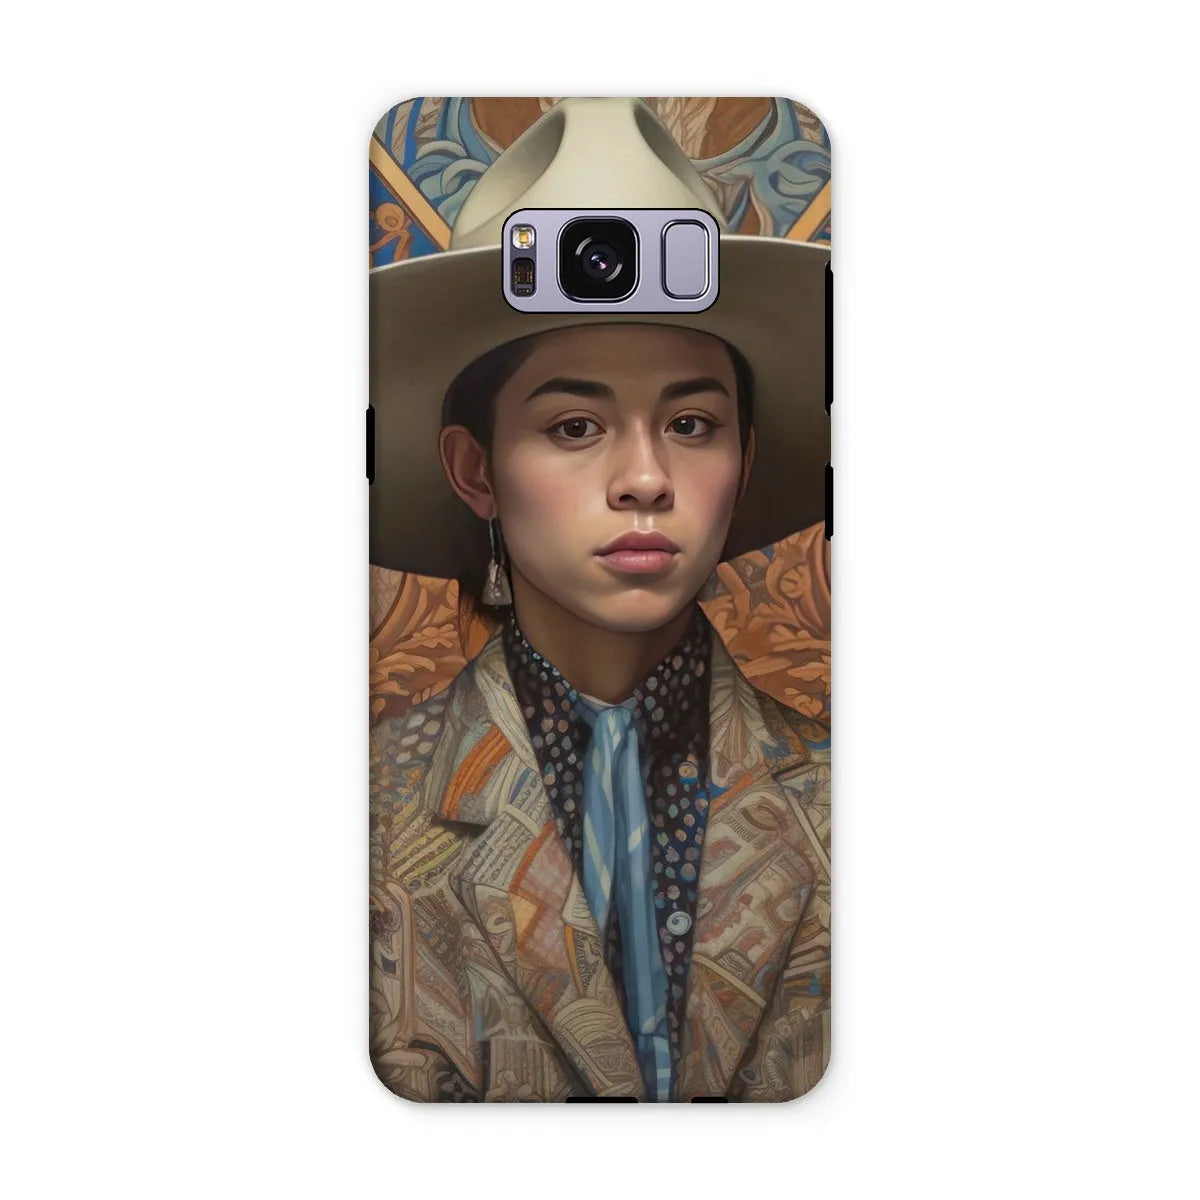 Angel The Transgender Cowboy - F2m Outlaw Art Phone Case - Samsung Galaxy S8 Plus / Matte - Mobile Phone Cases